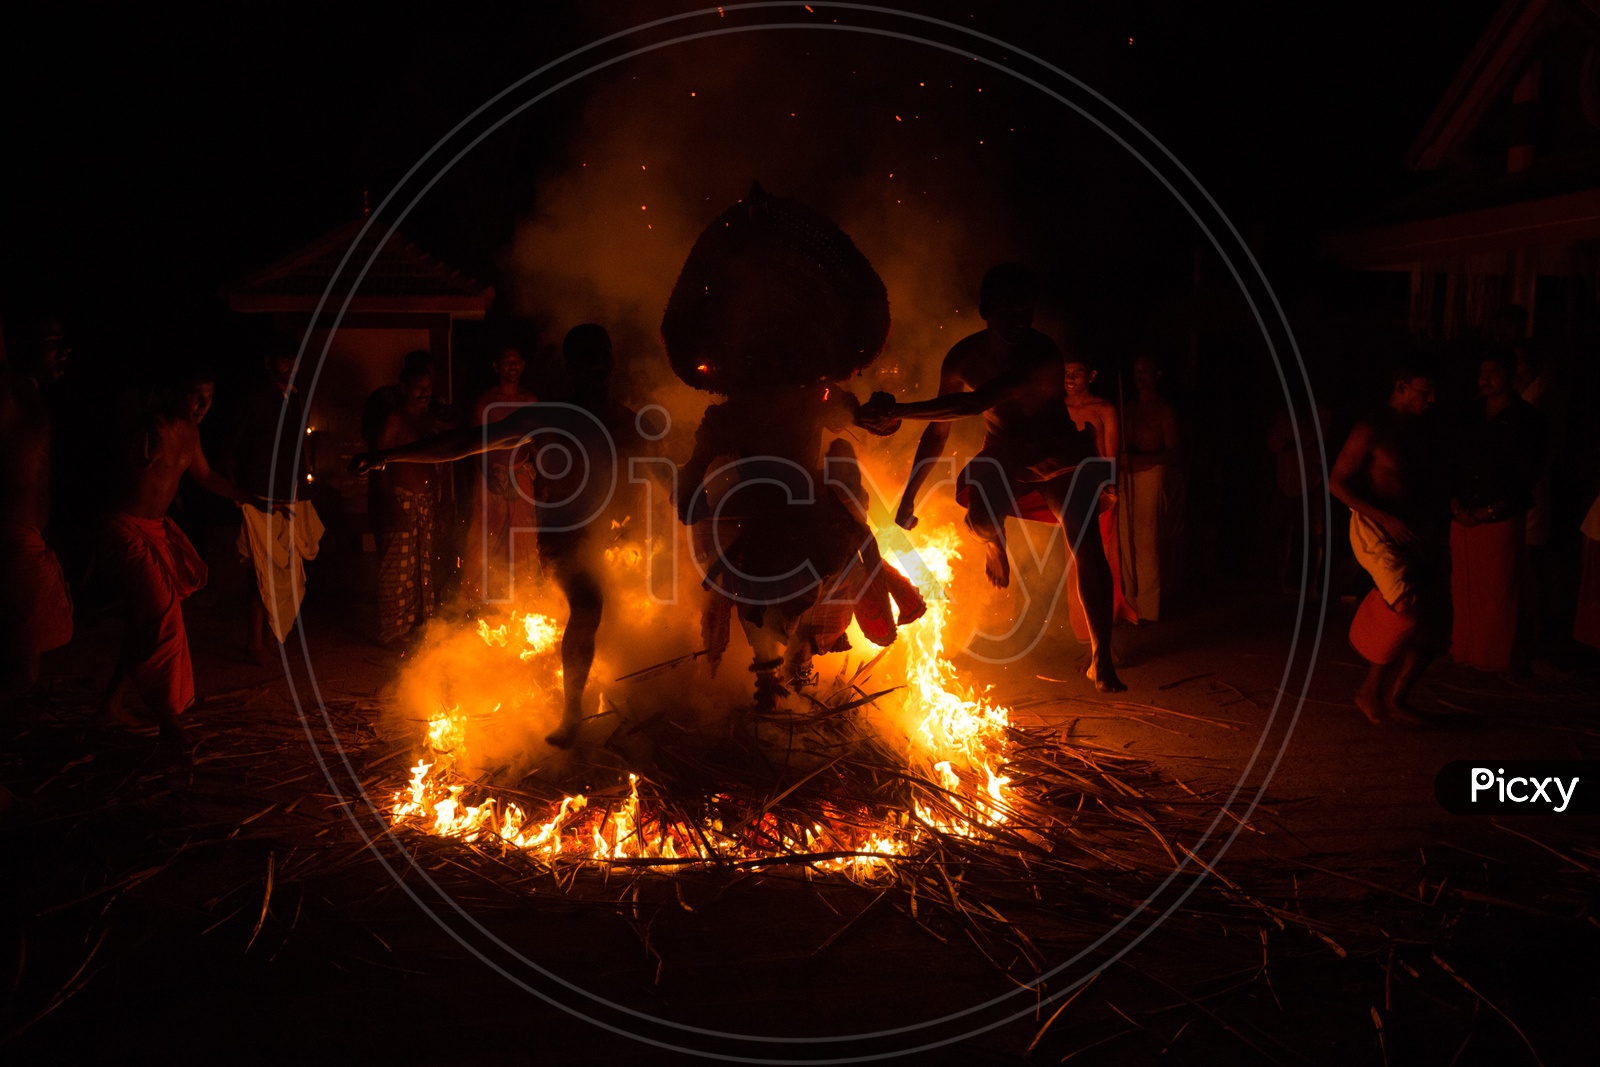 Theyyam Artists Performing Around The Fire At Bhagawathi Amman Temples As a a Ritual In Theyyam Celebrations